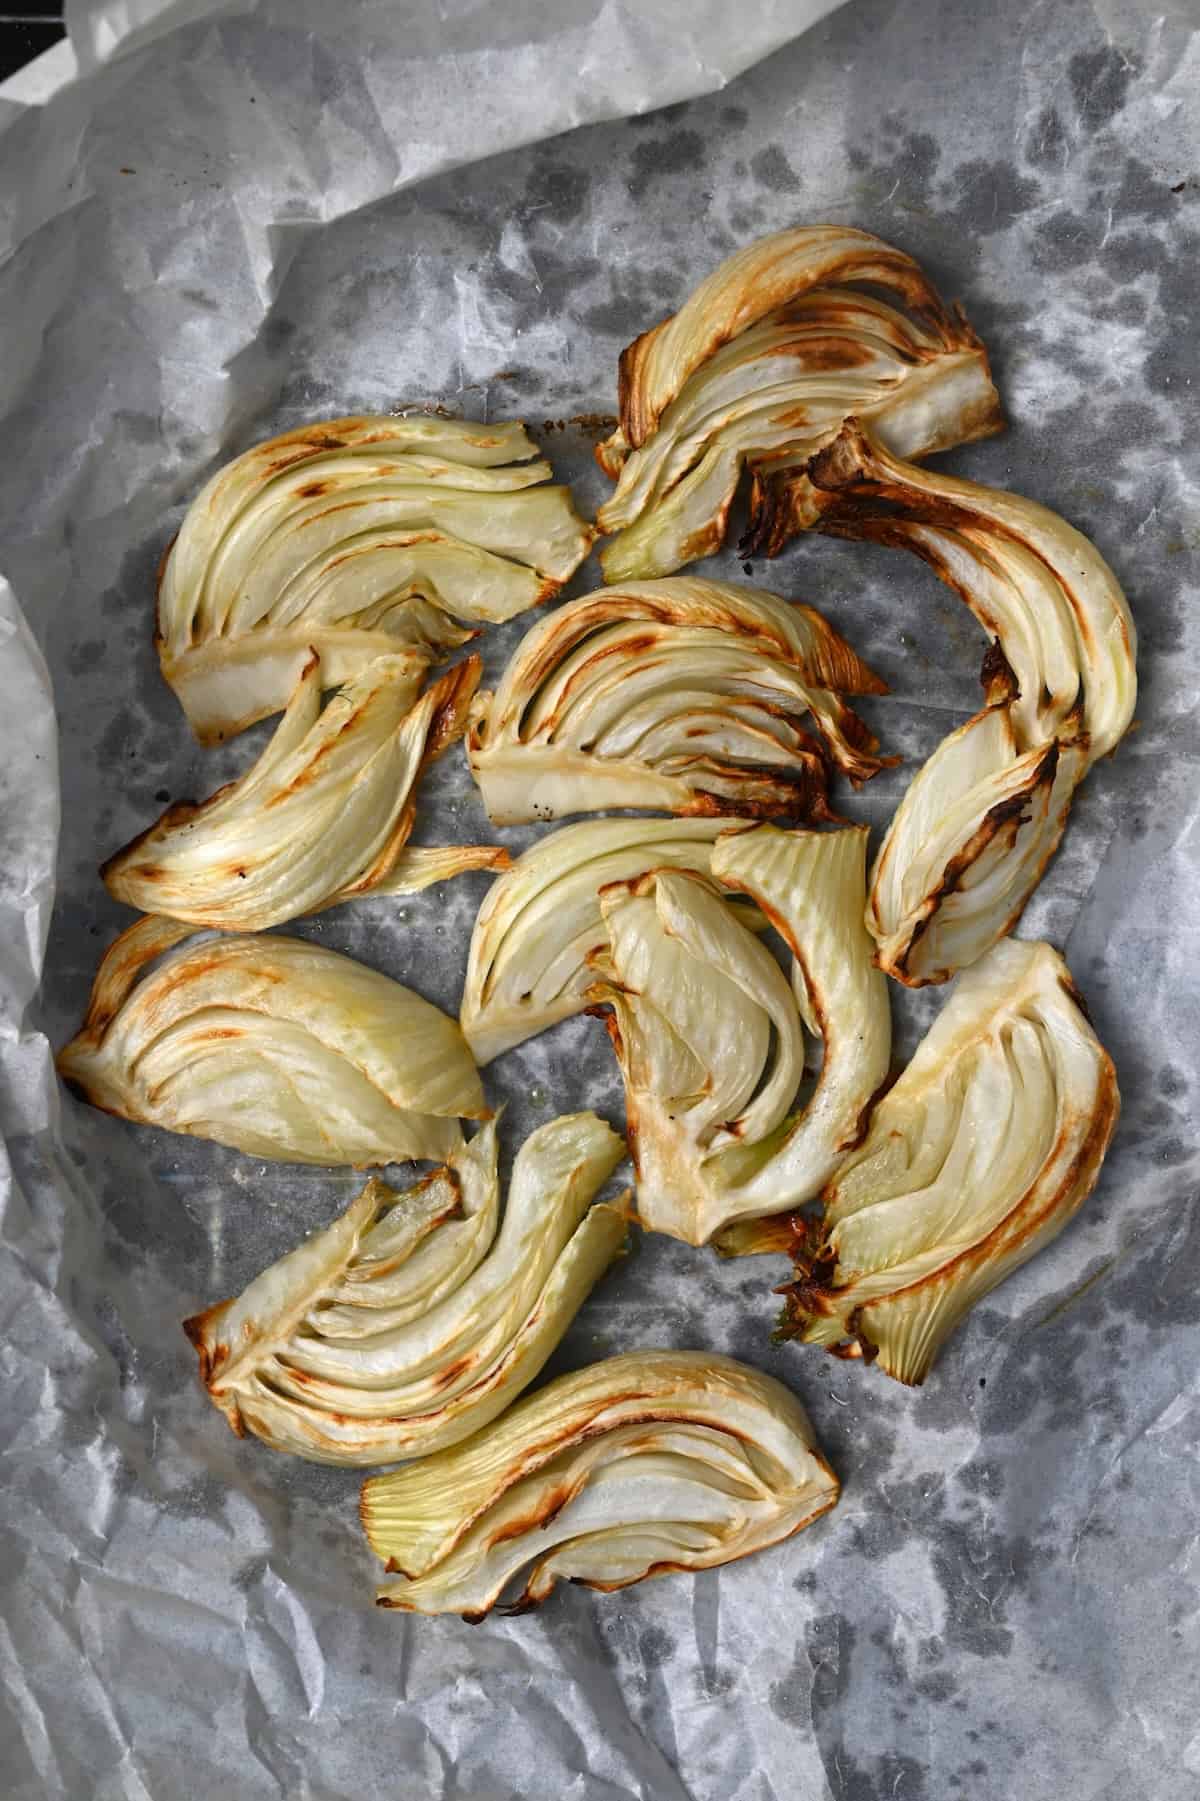 Roasted fennel on a baking tray